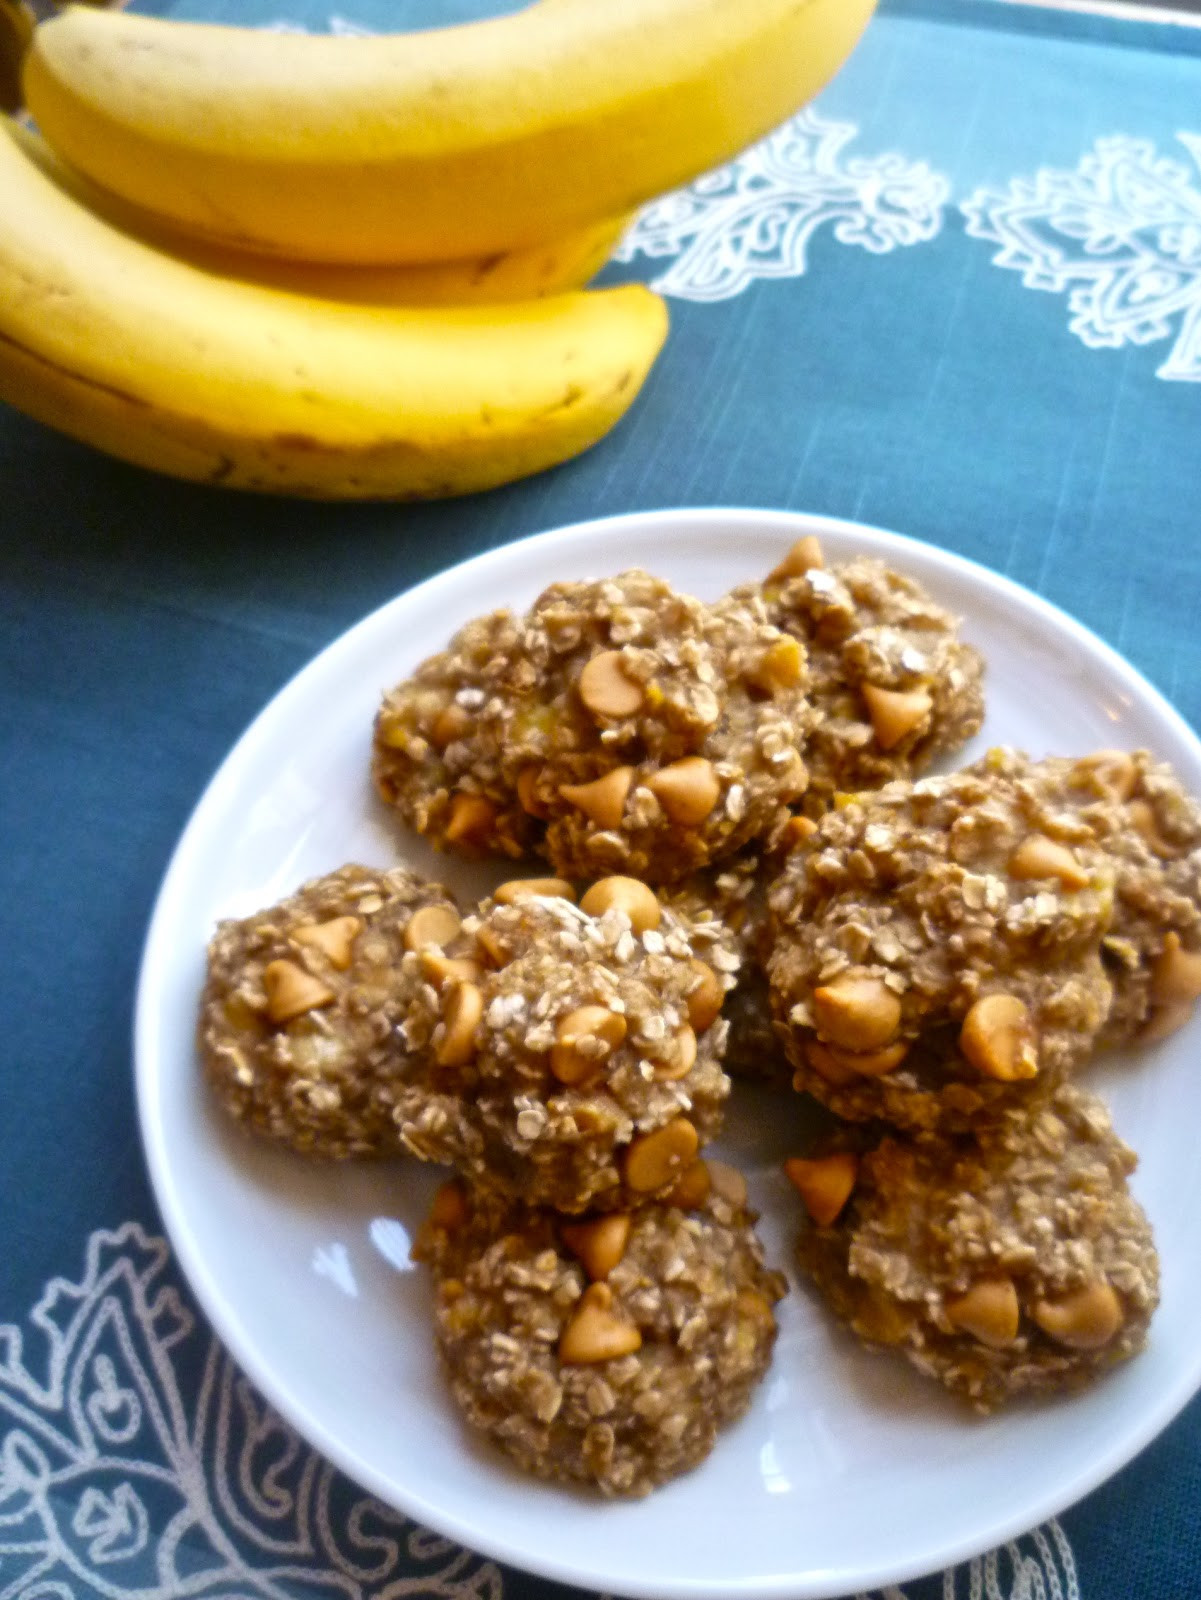 Healthy Banana Cookies Without Oatmeal
 What s Baking in the Barbershop 3 Ingre nt Healthy